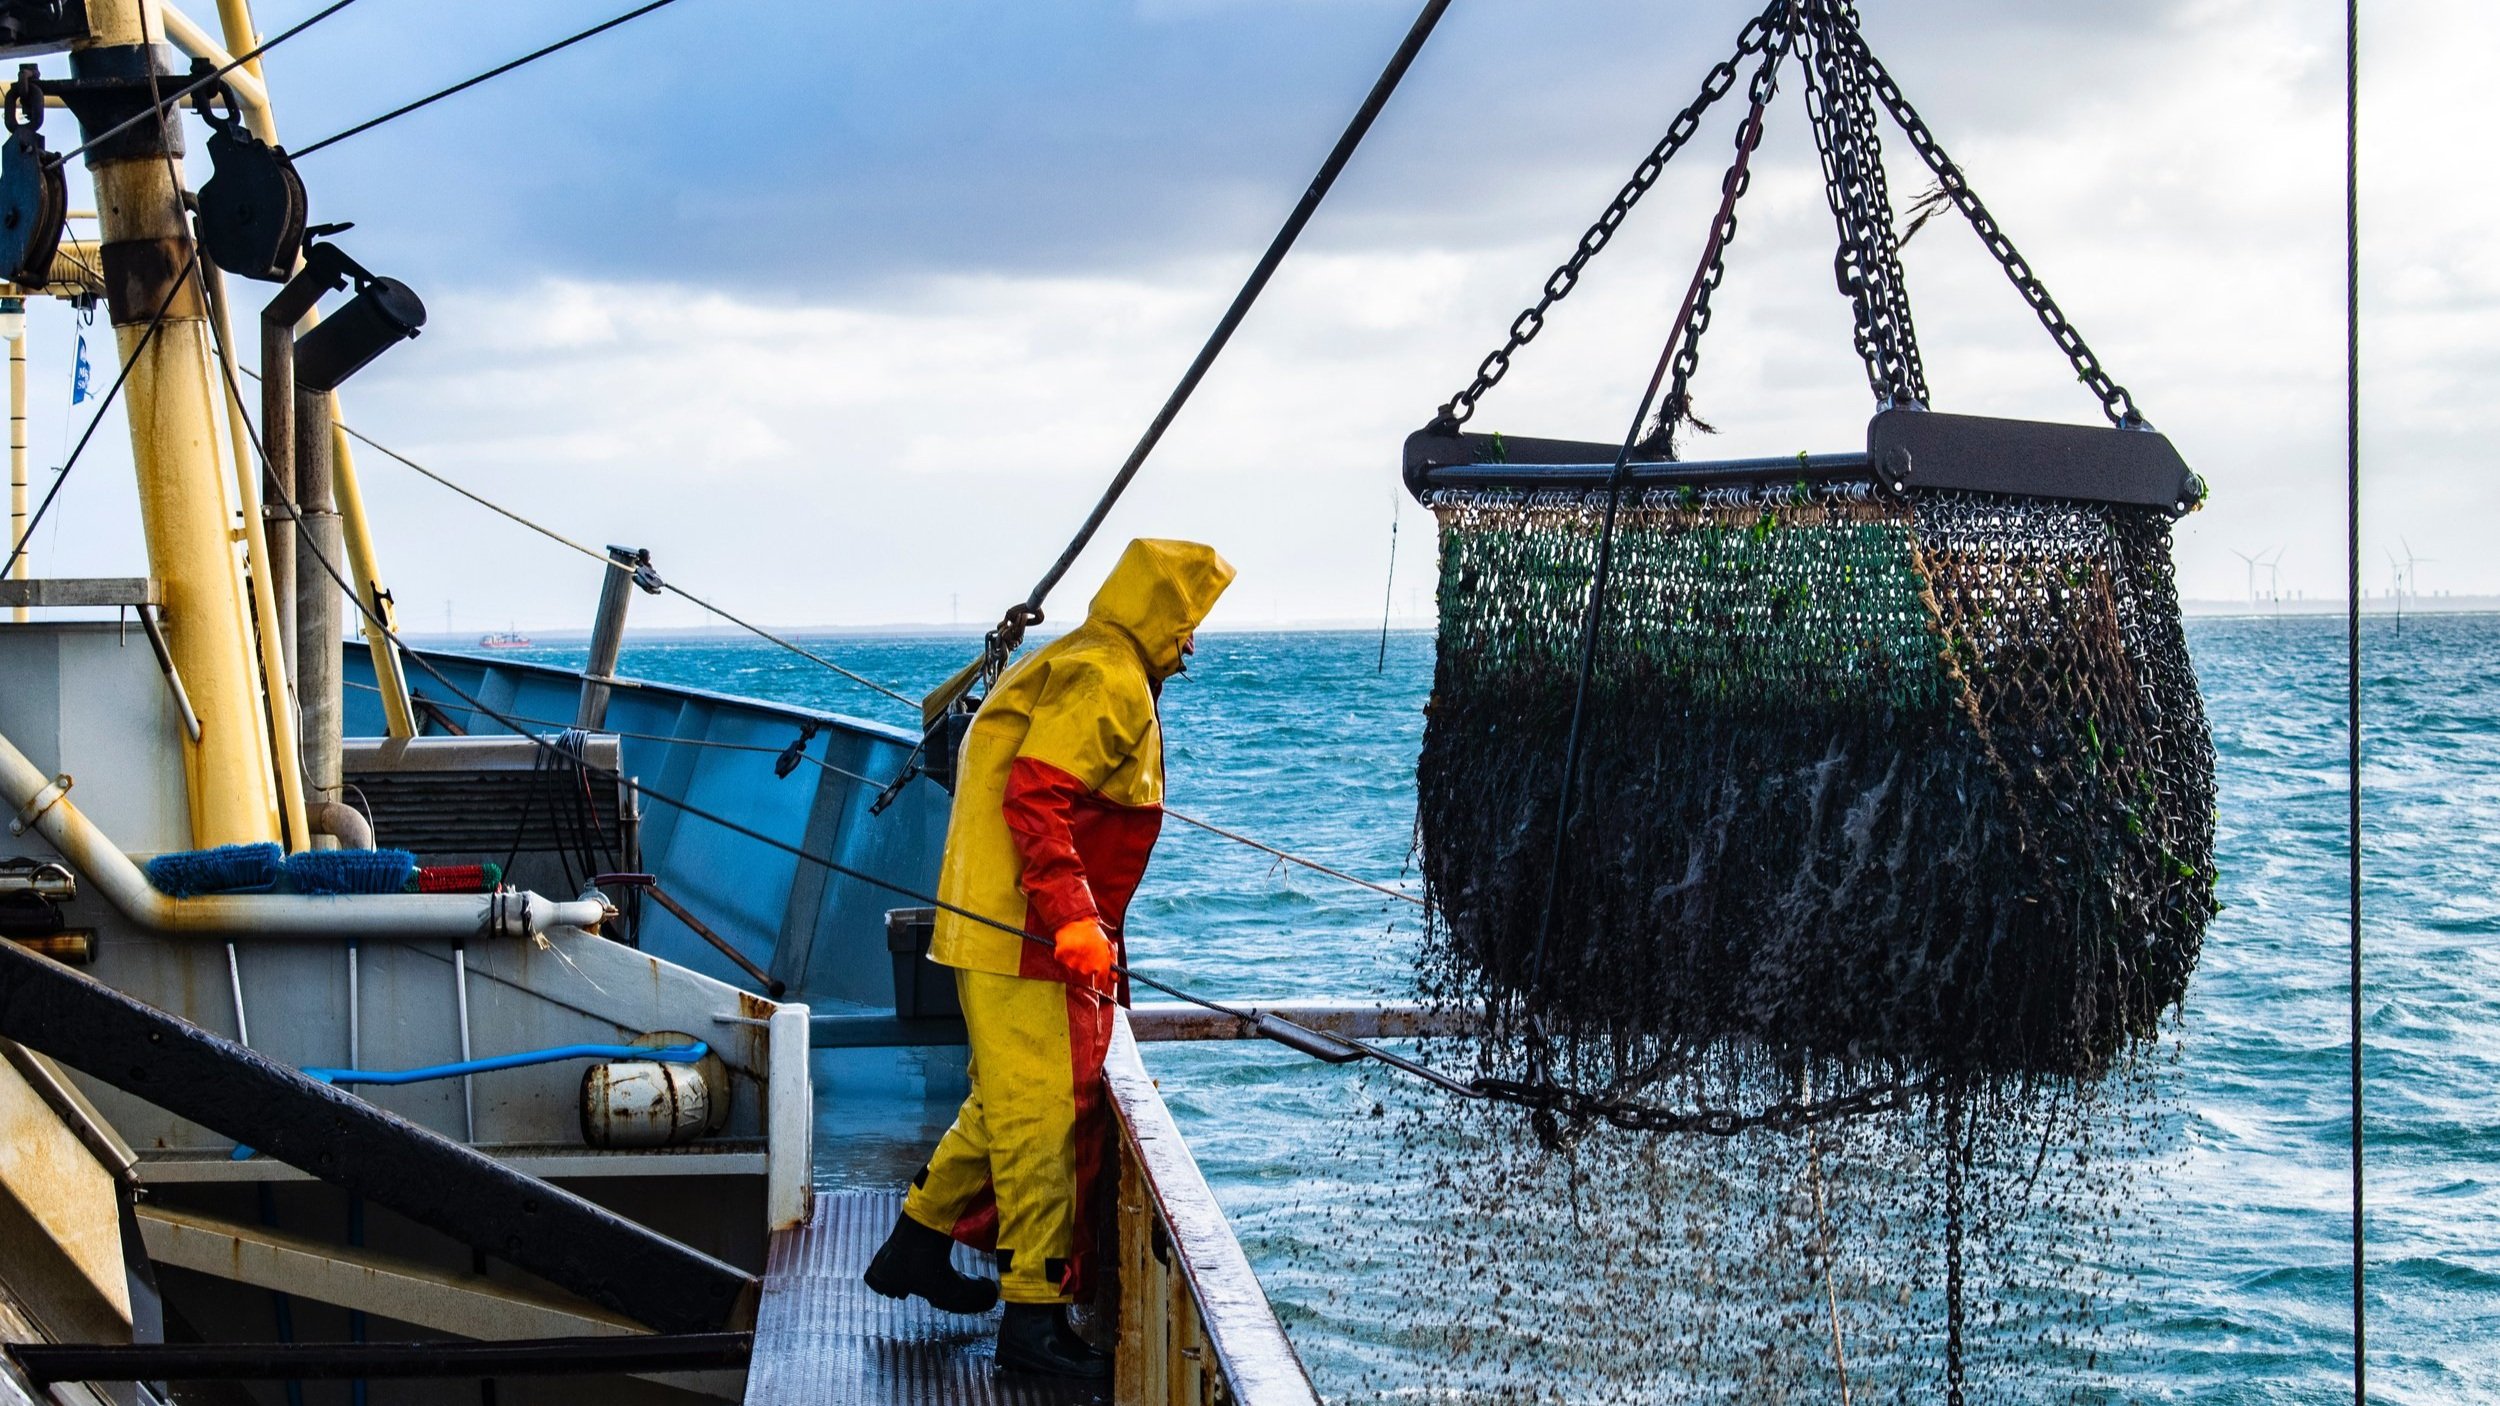 RyeStrategy - The Fishing Industry's High Tech Transition to